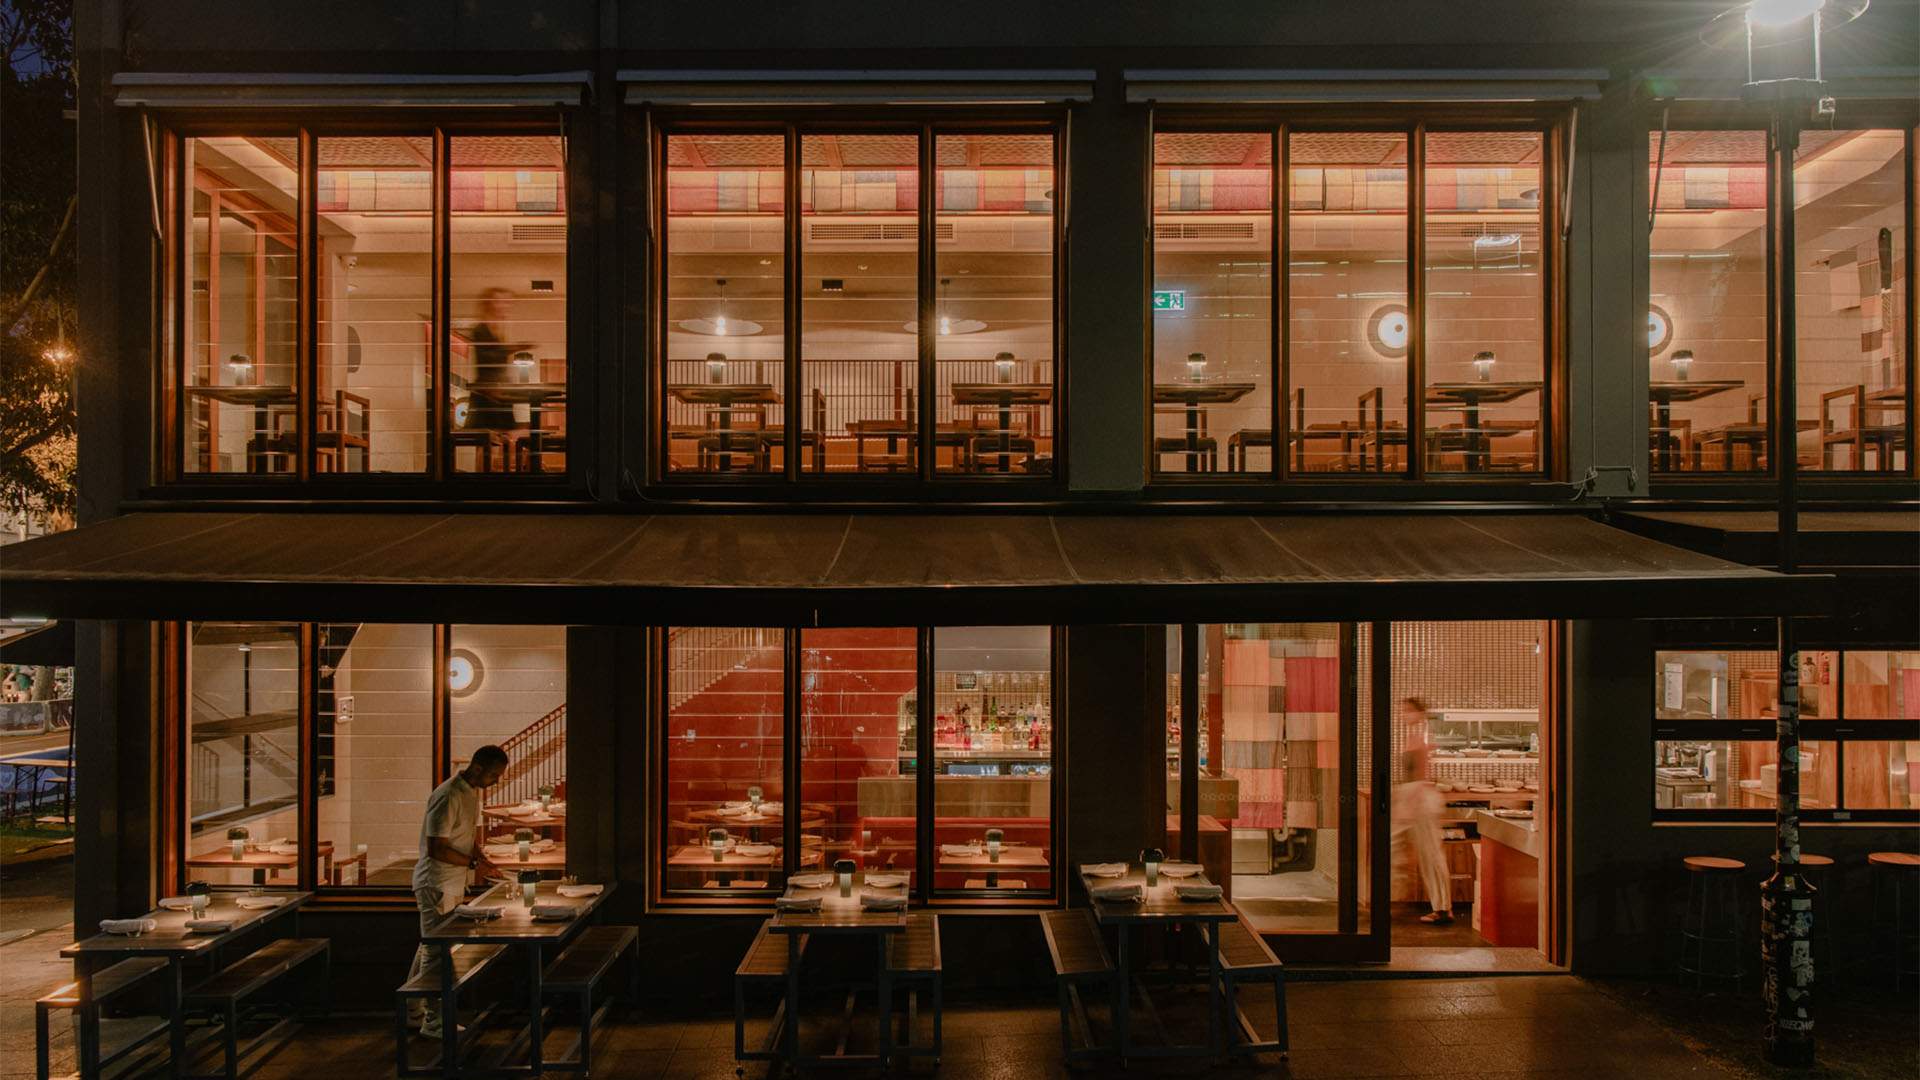 Ito Is the Two-Storey Japanese Izakaya That's Moved Into Cuckoo Callay's Old Surry Hills Digs